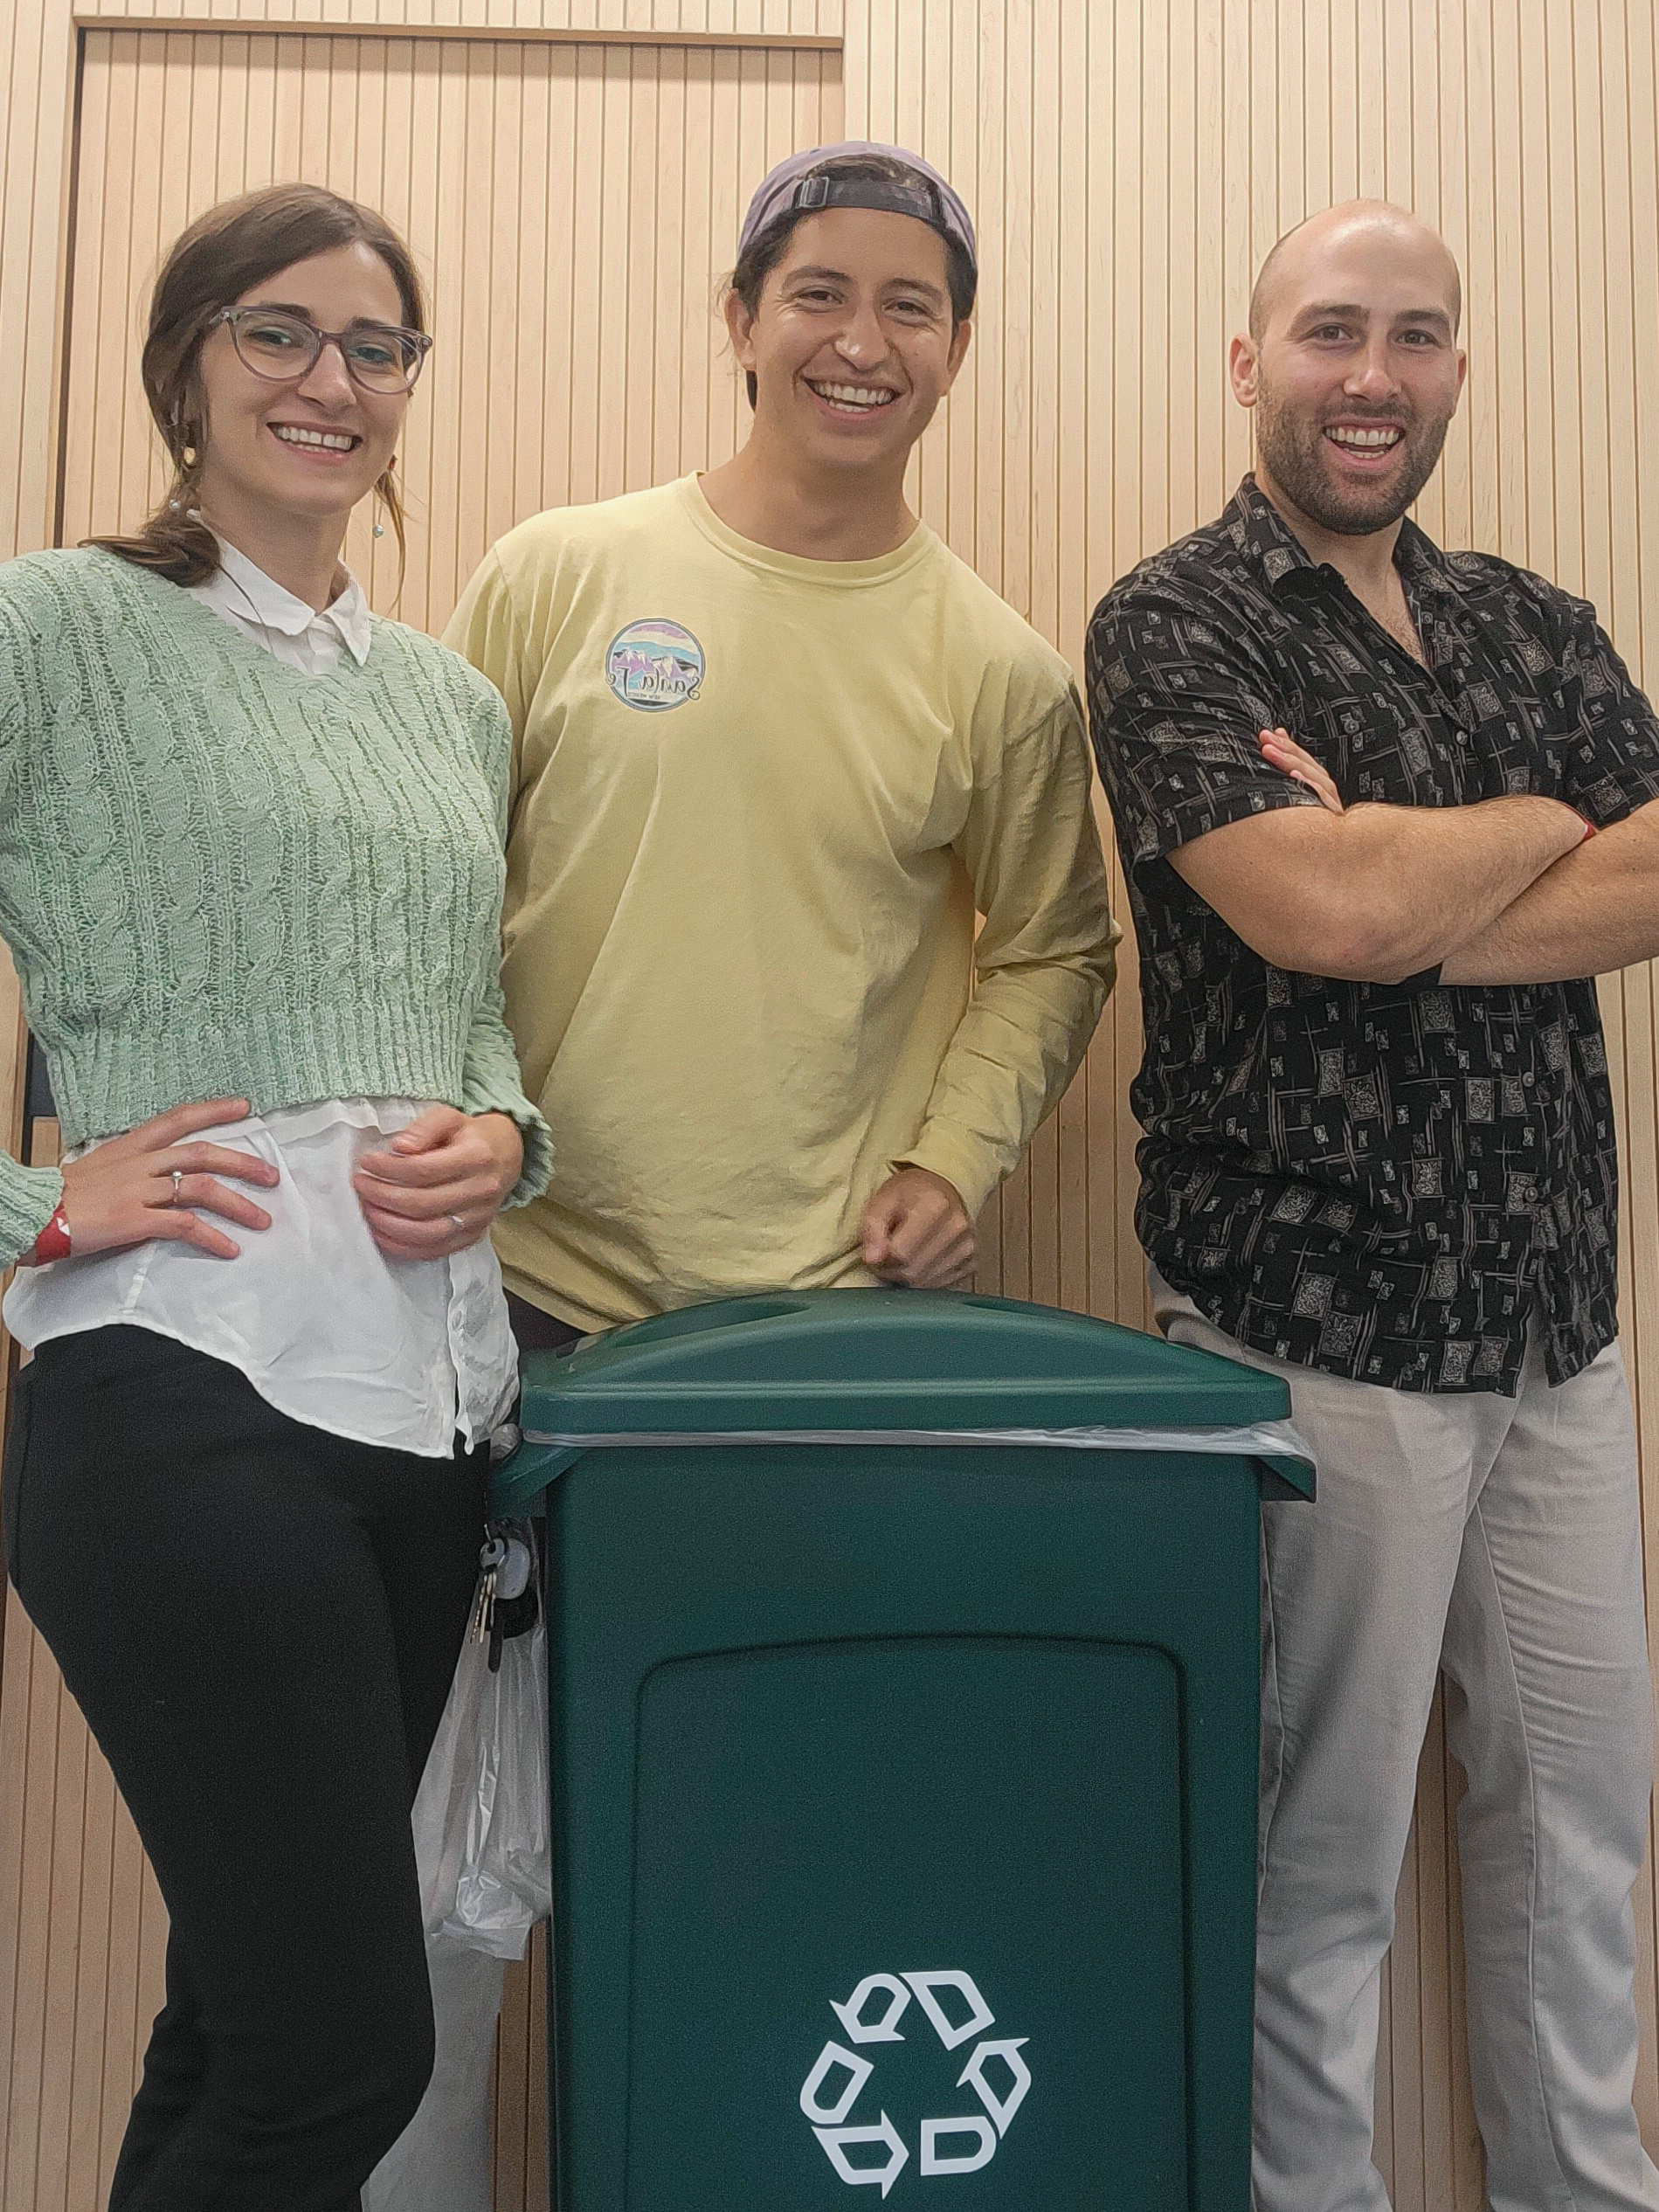 Founders of decycl, Marshall Ross, Alex Garcia and Mackenzie Lee